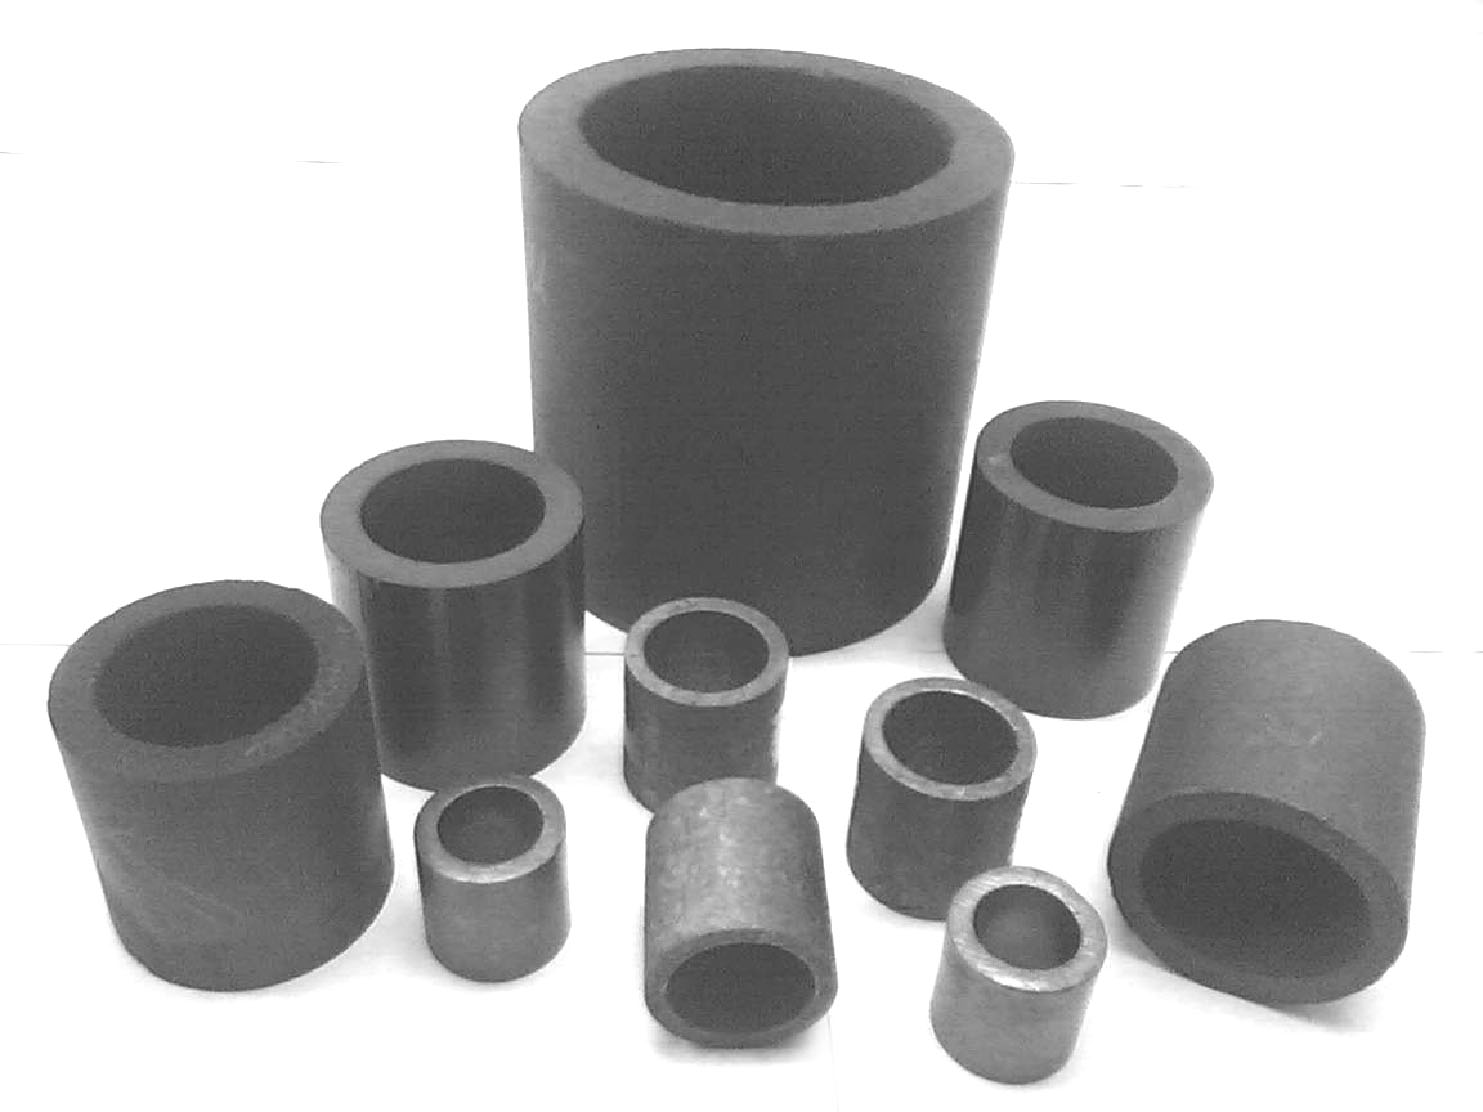  Carbon & Graphite Raschig Rings, Tower Packings (Carbon & Graphite Рашига кольца, башня Упаковки)